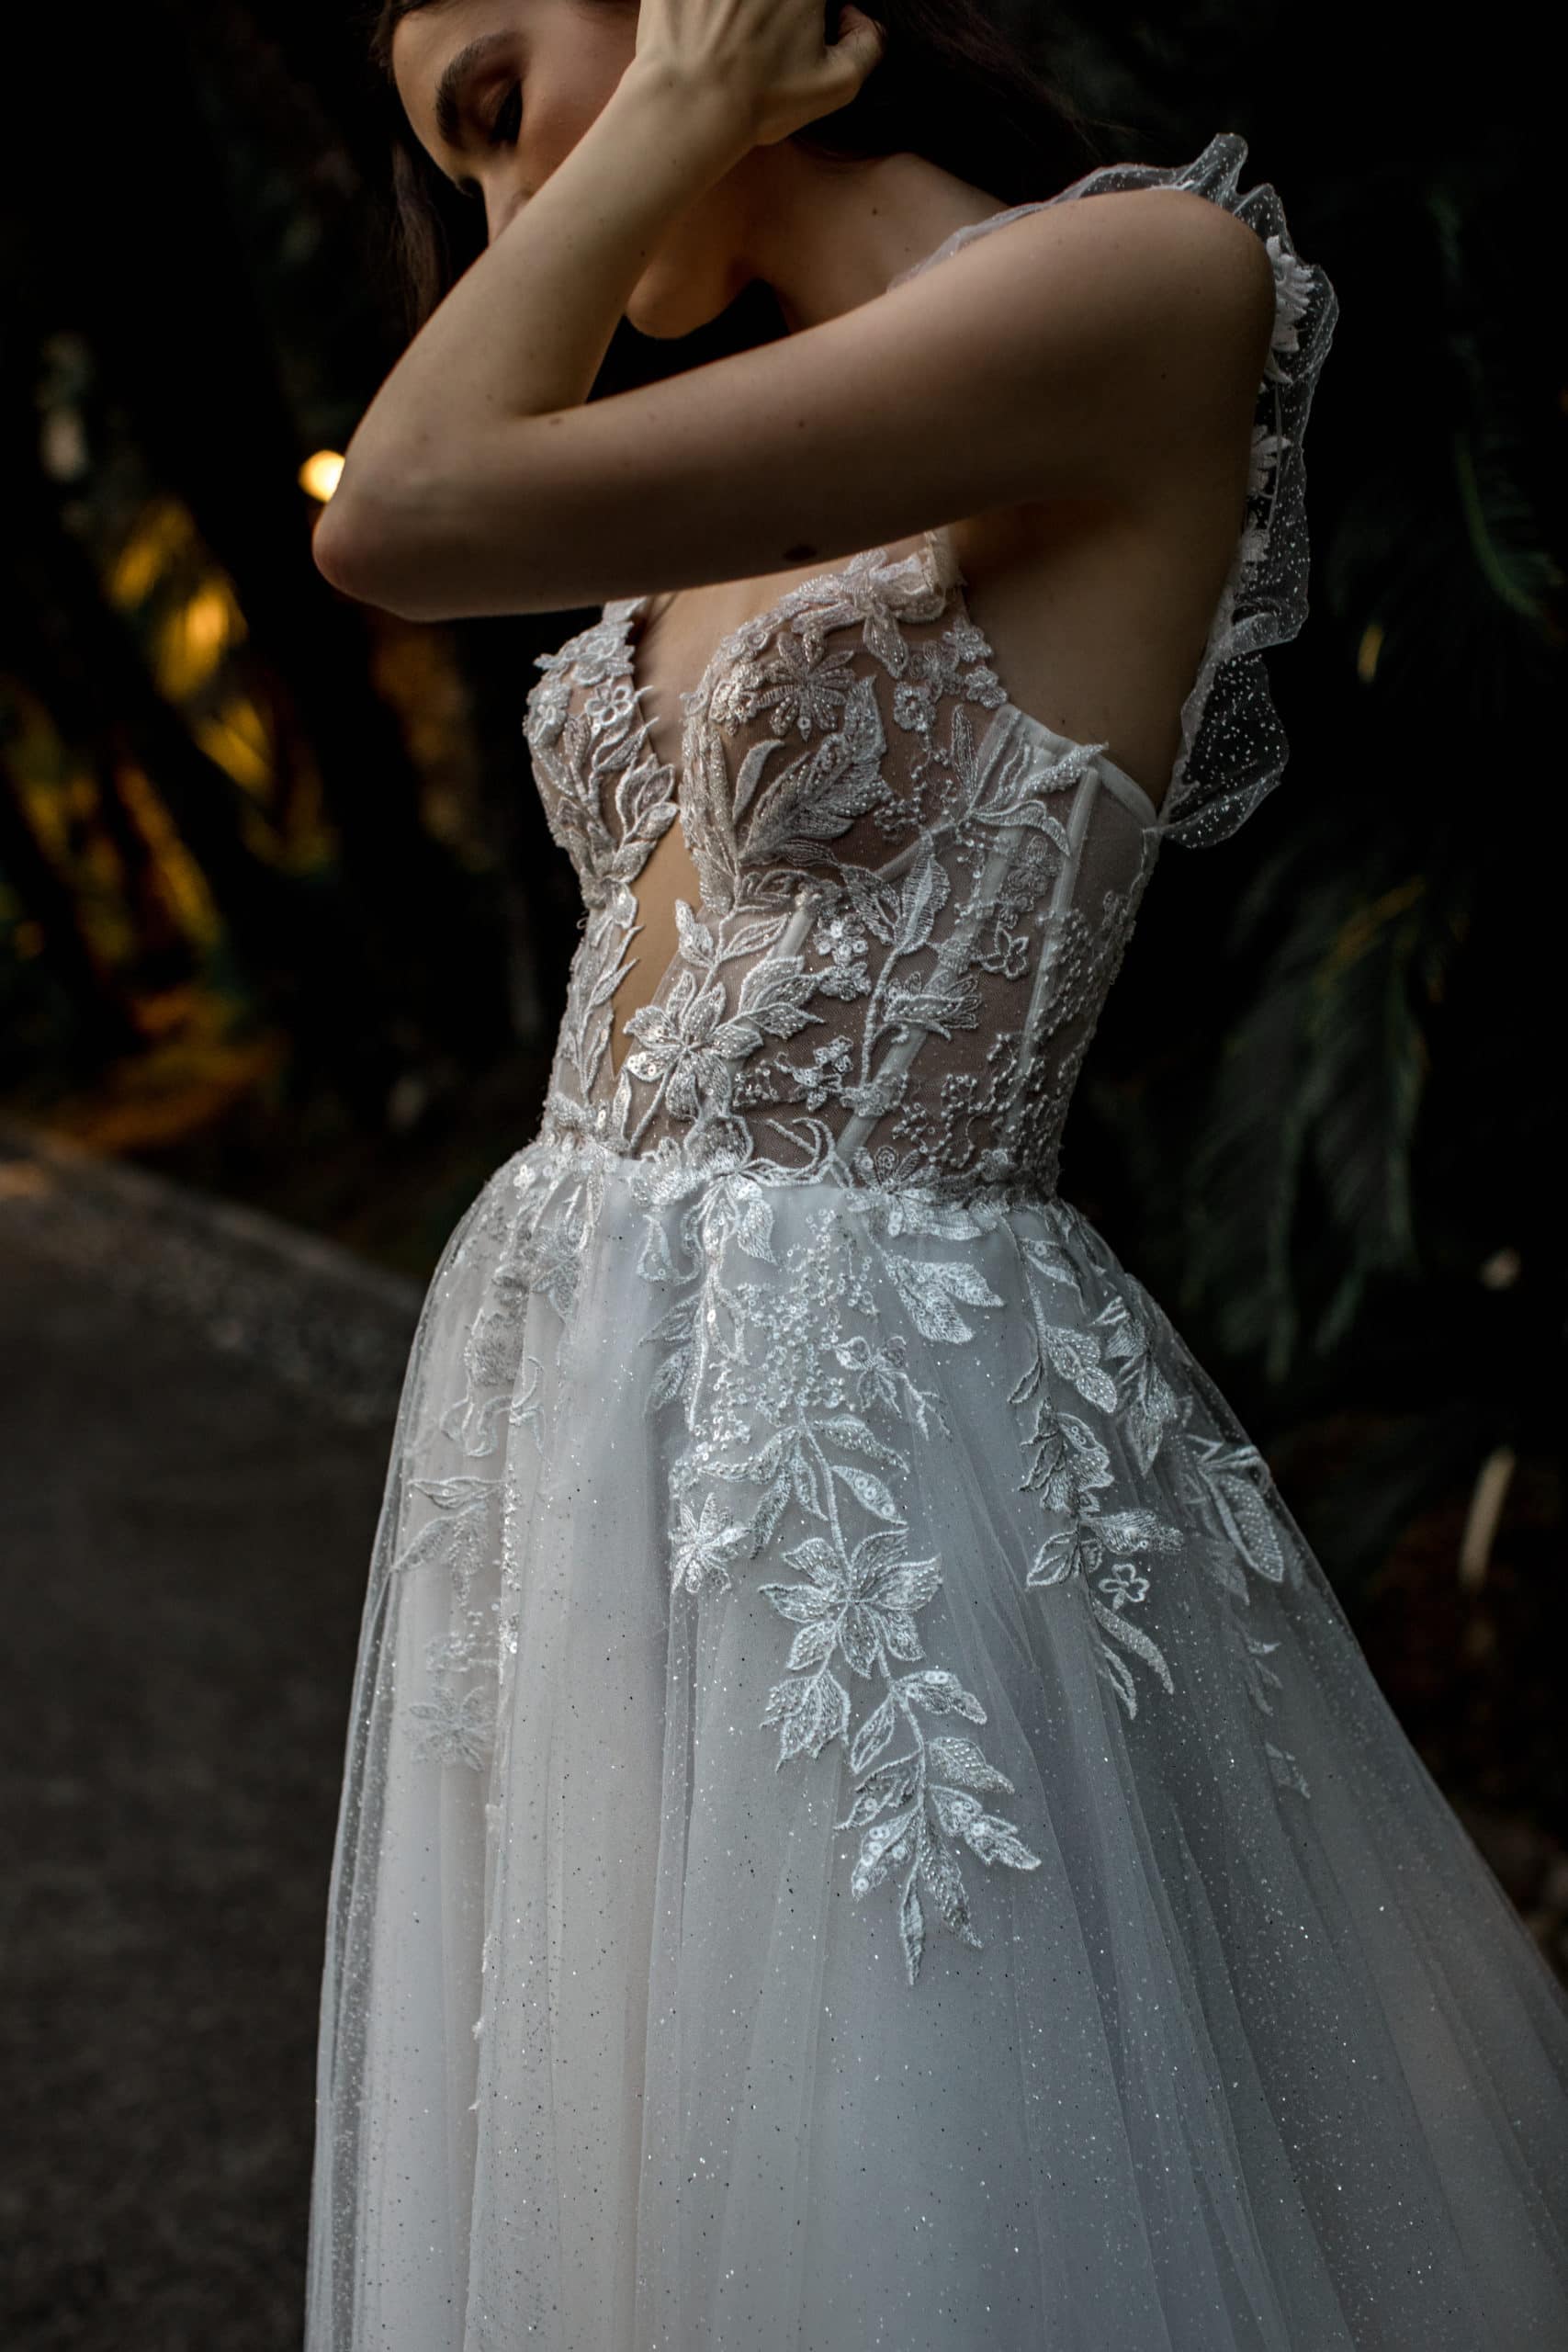 Lace beaded detail on wedding dress